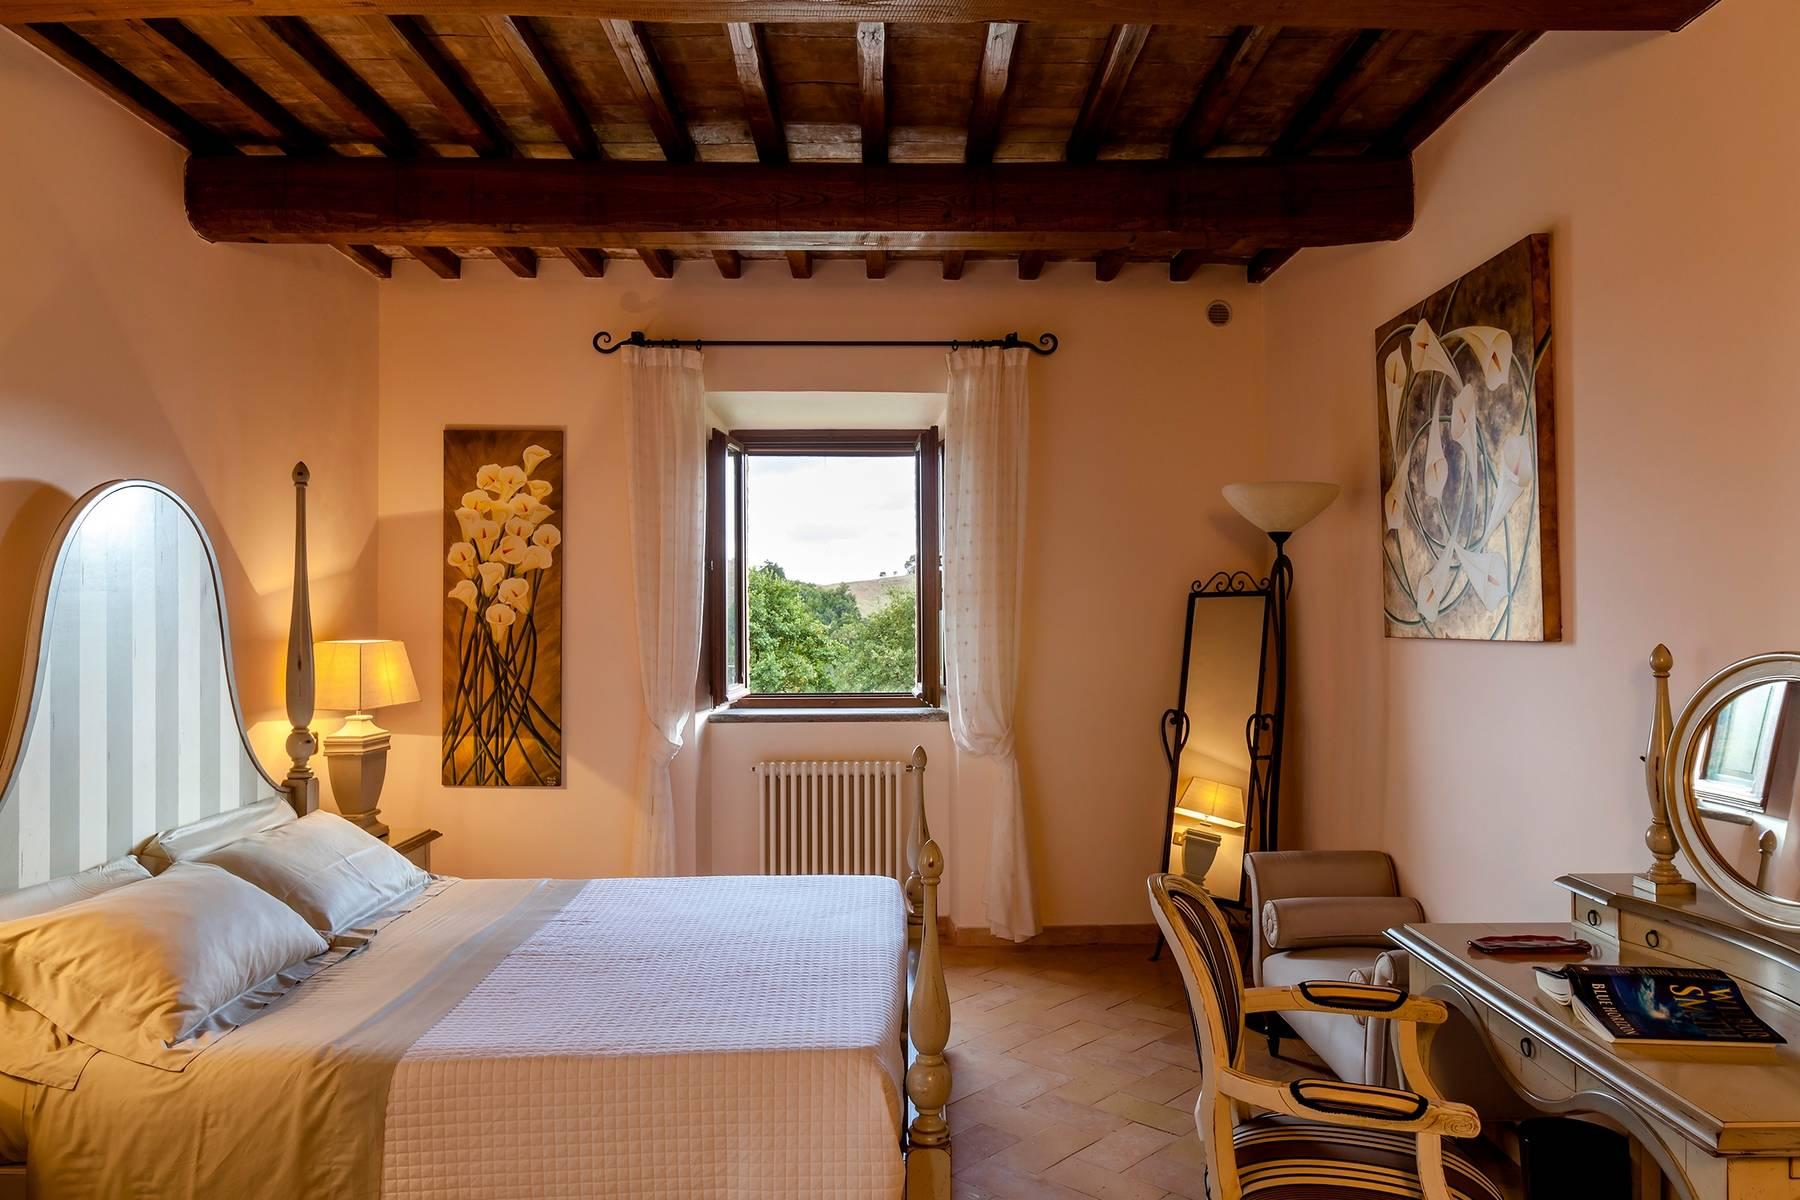 A Gorgeous estate nestled between Tuscany, Umbria, and Lazio - 15